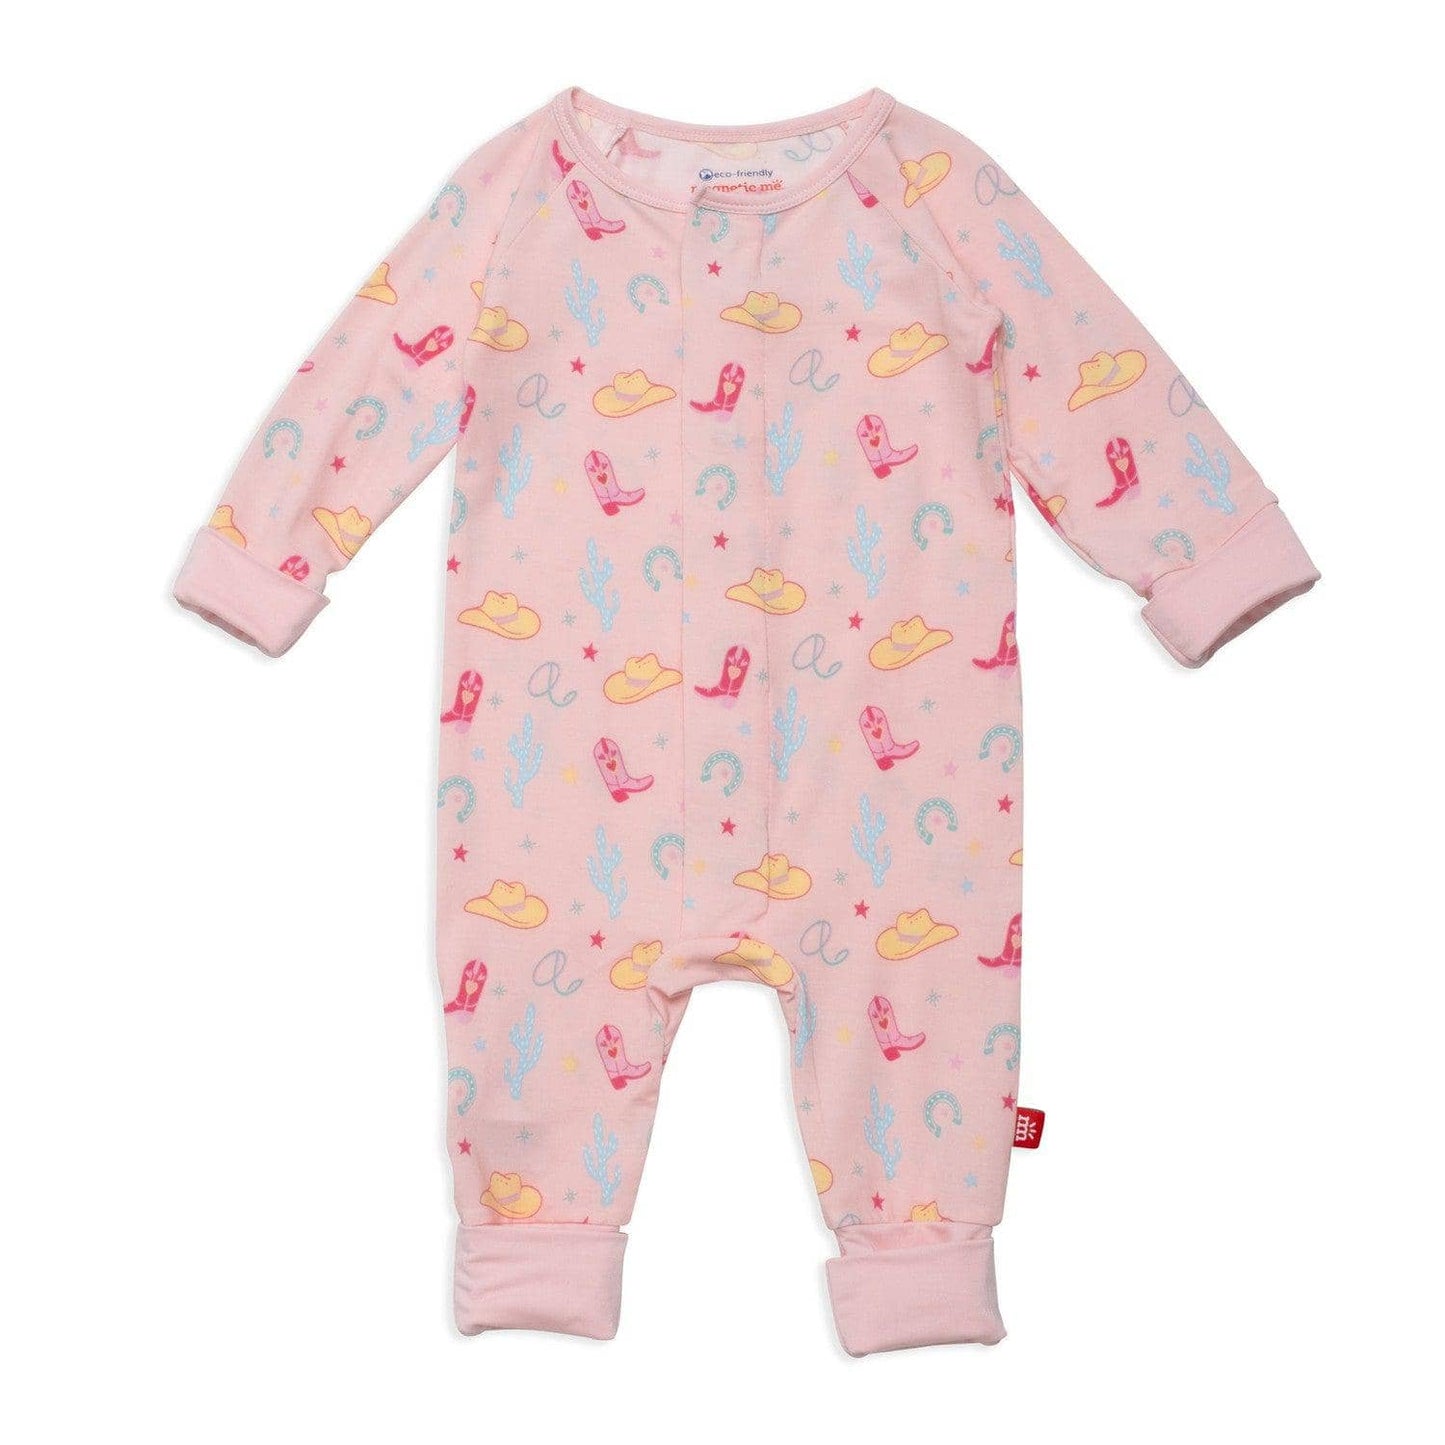 Magnetic Me not my first rodeo romper